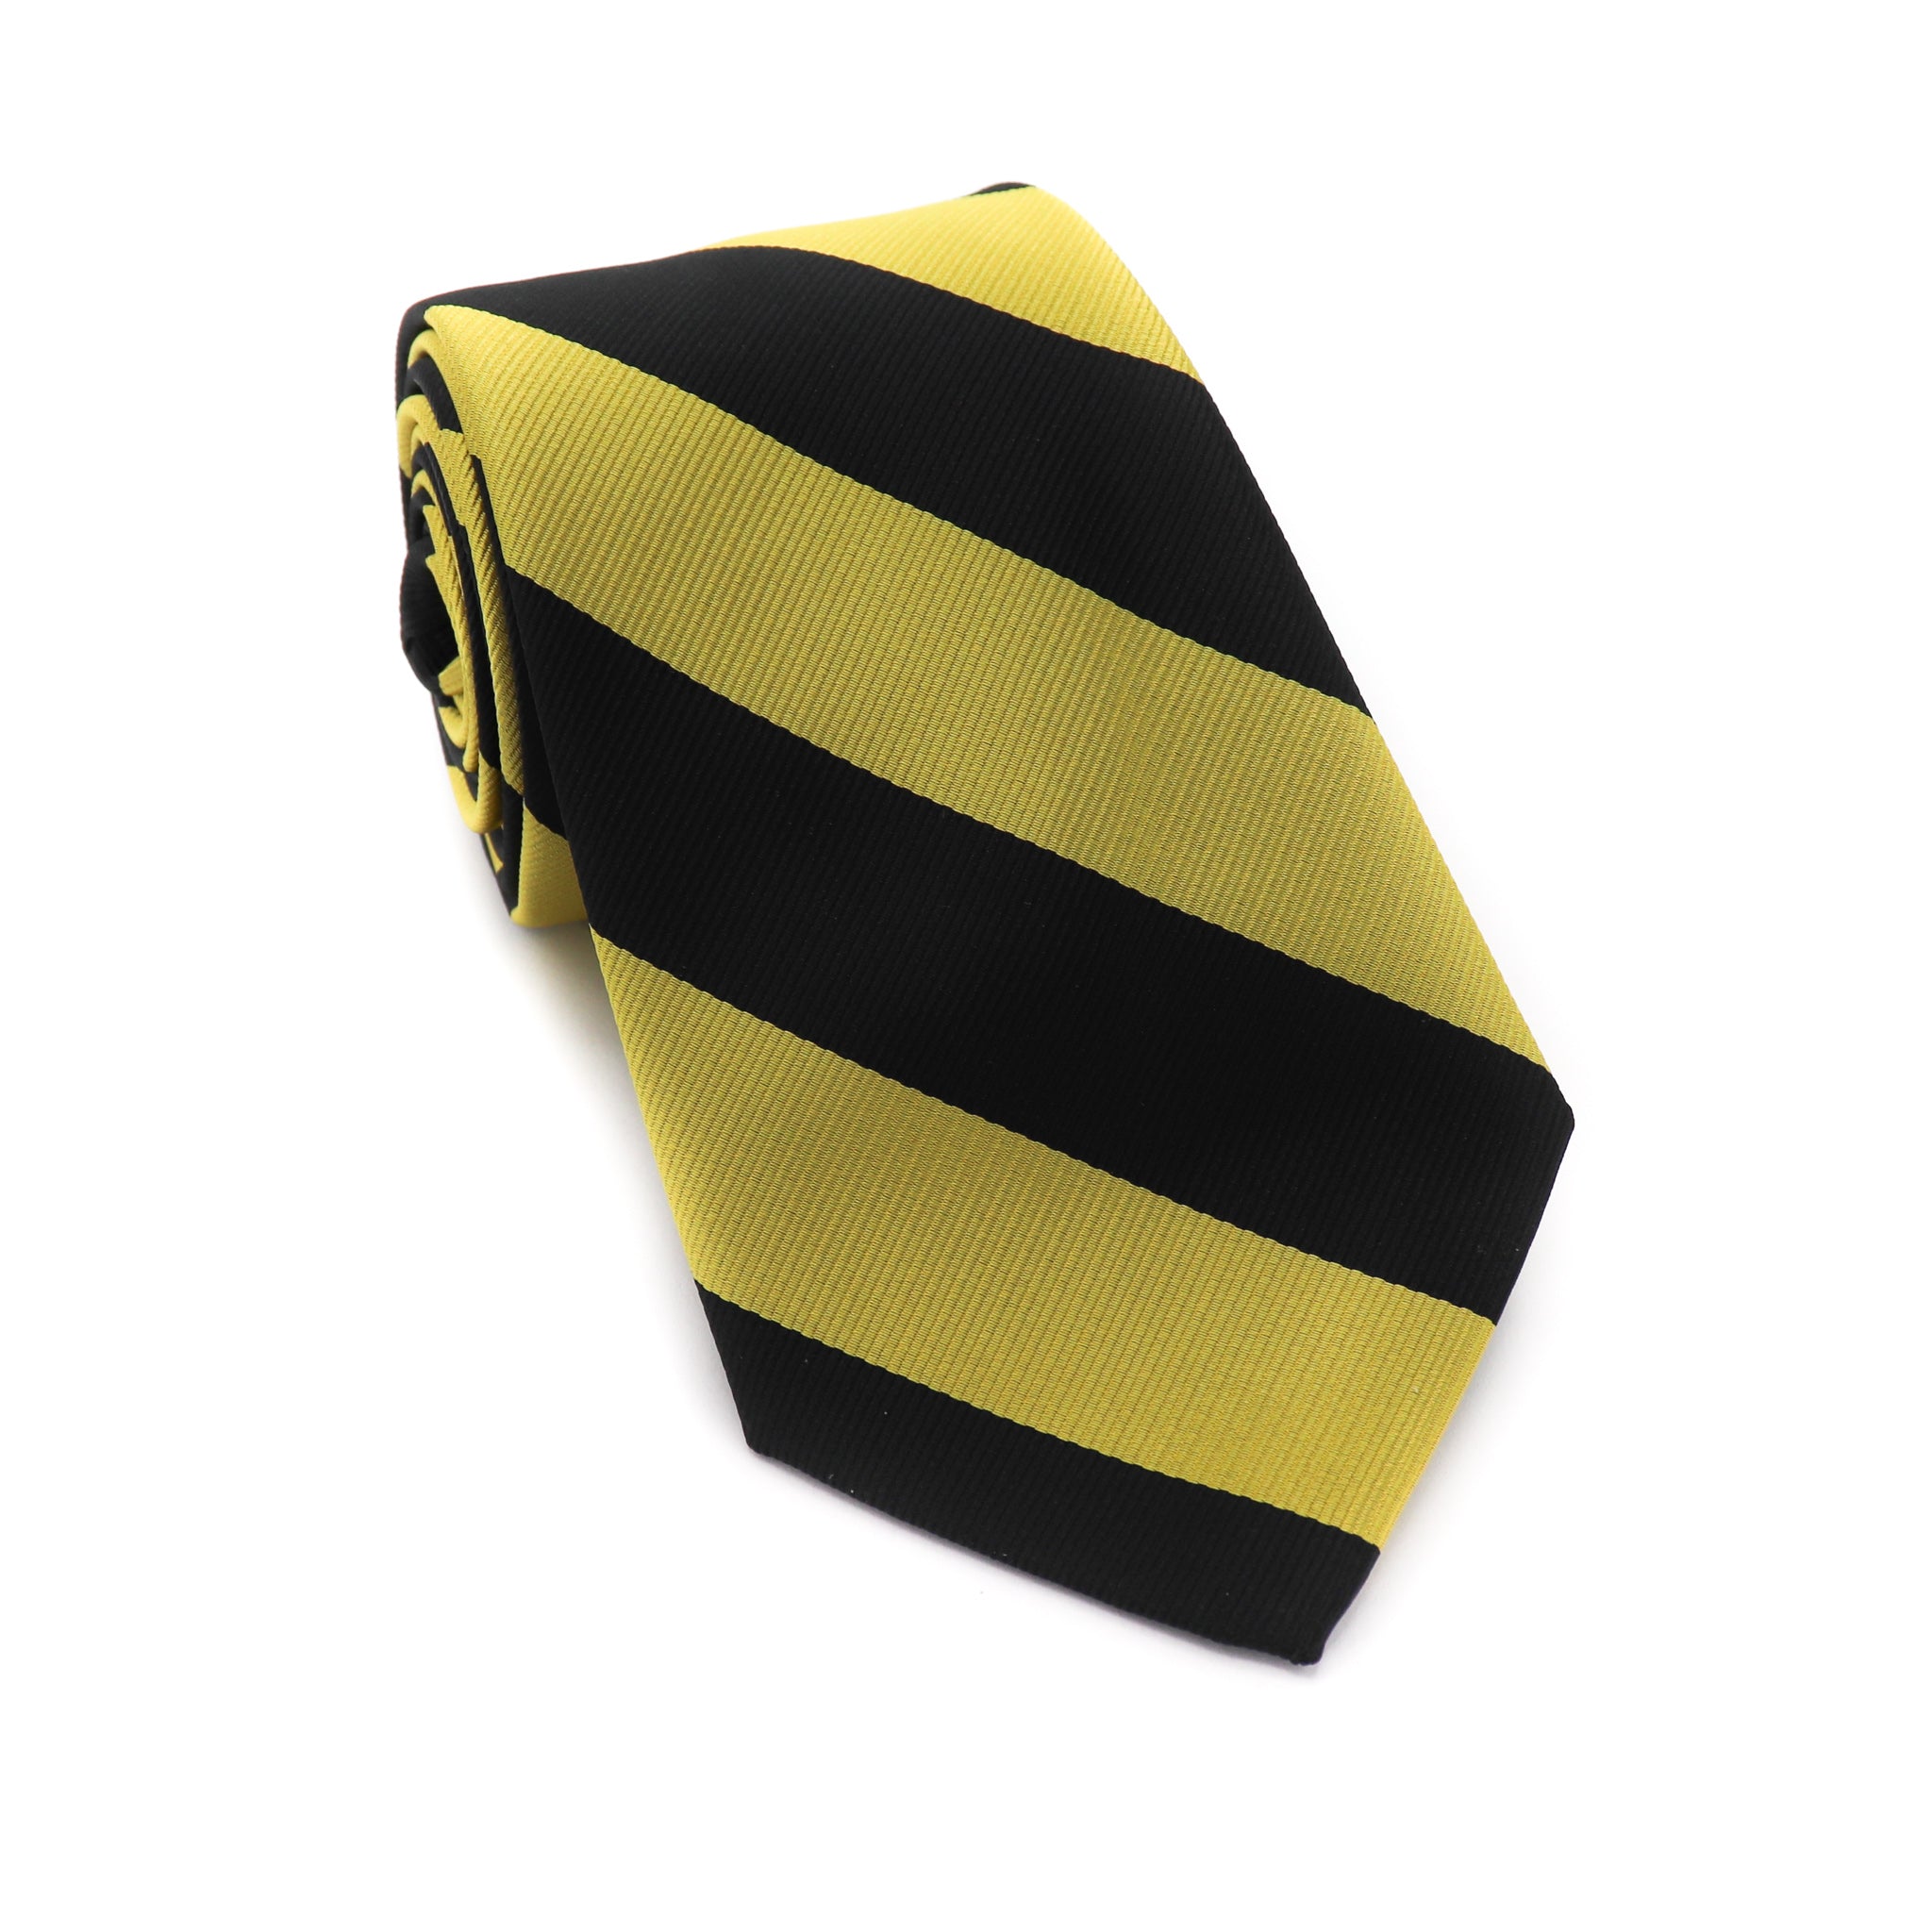 Black and Gold Tie